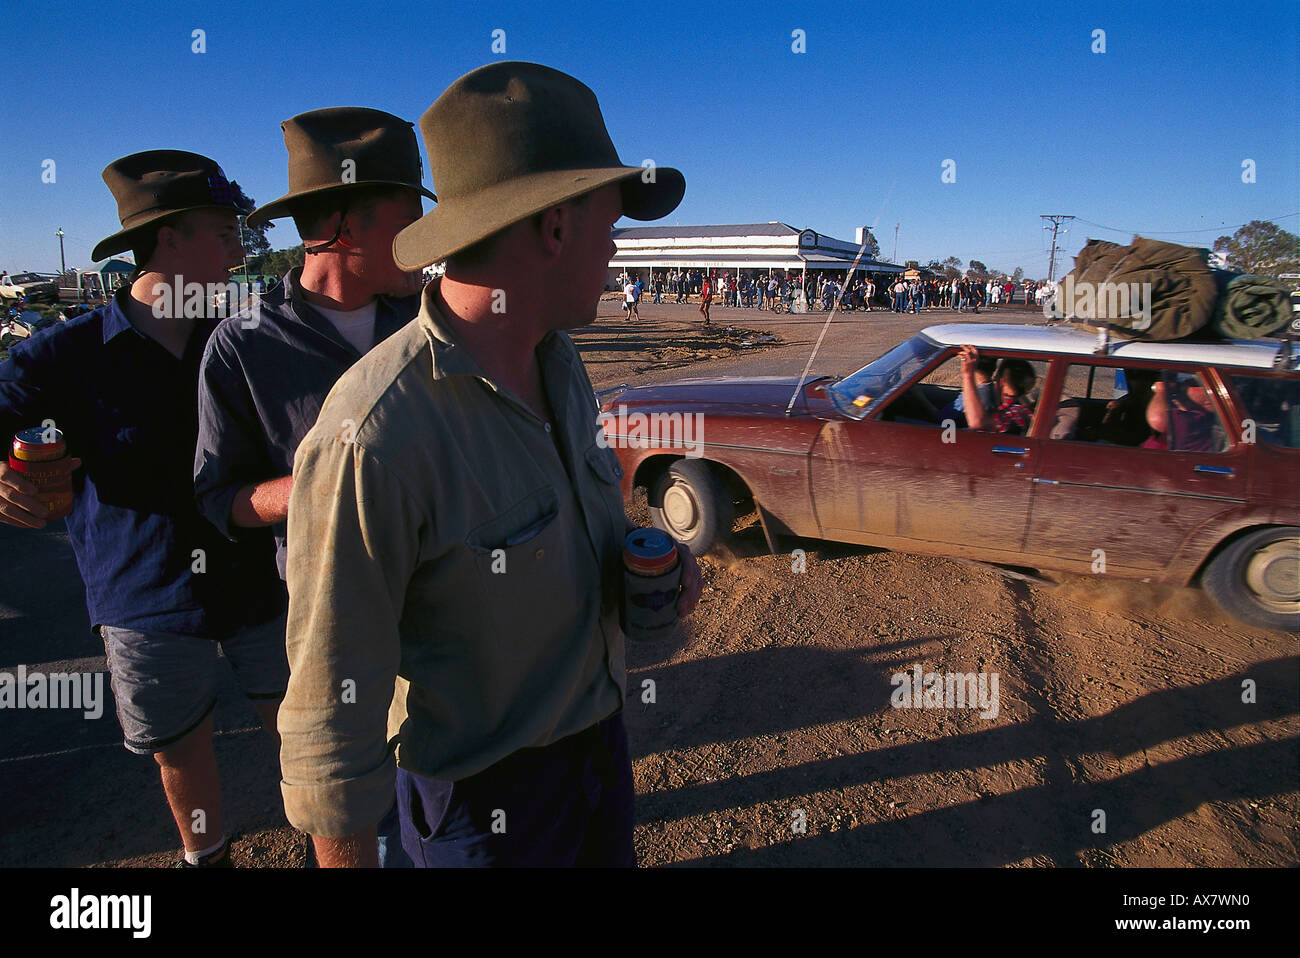 Young men looking at a car, a crowd in front of the pub, Birdsville, Simpson Desert, Queensland, Australia Stock Photo